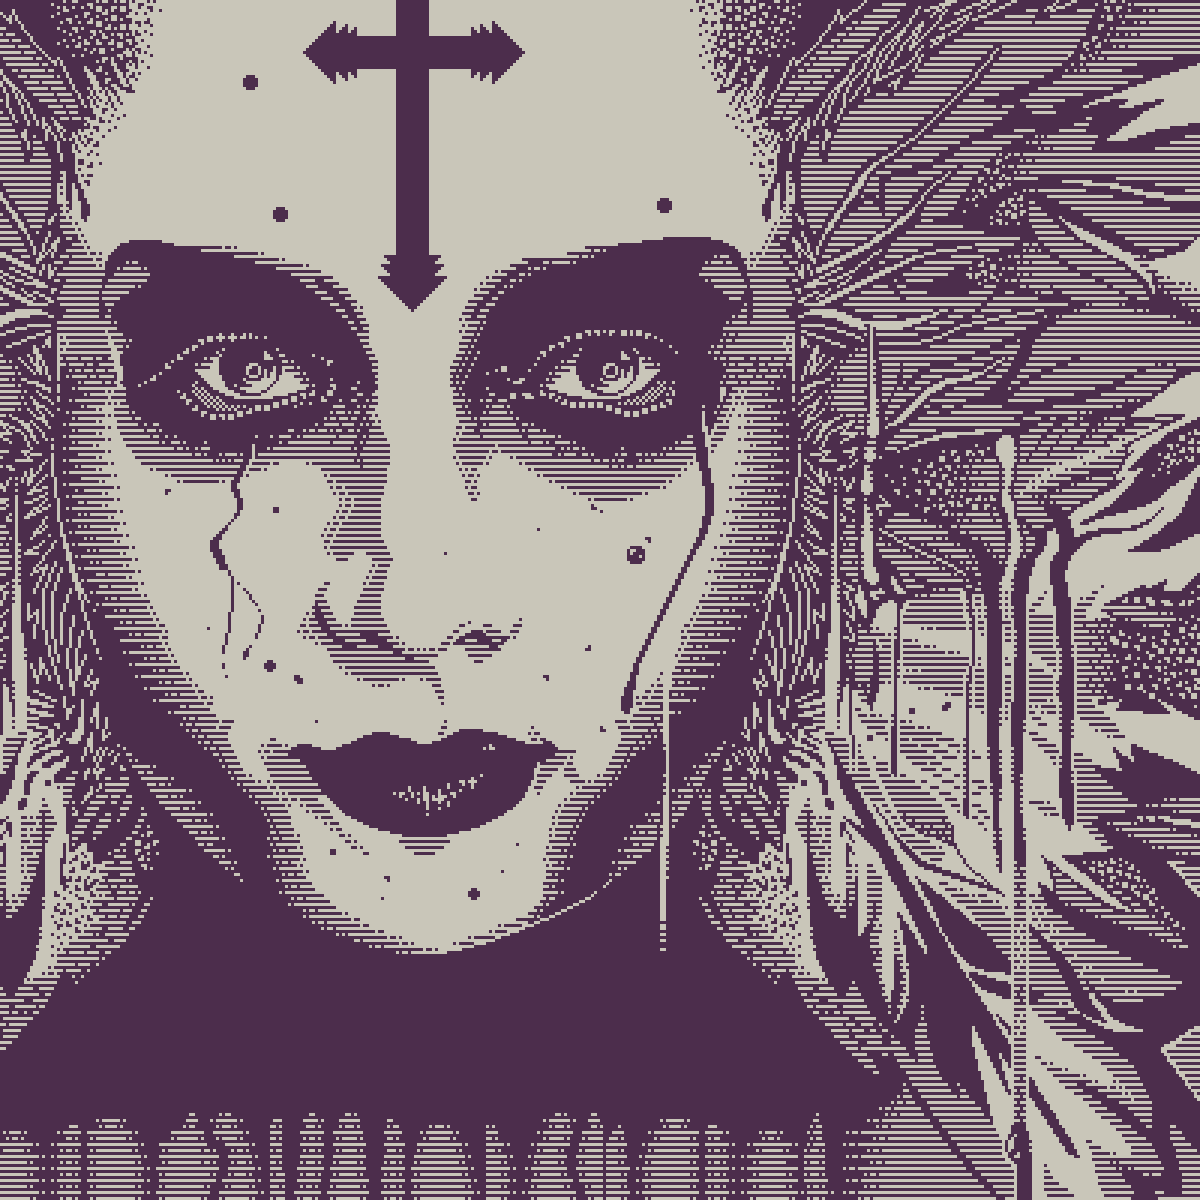 I've been working on this for so long that I don't like it anymore, but hopefully some of you do.

#pixelart #portrait #1bit